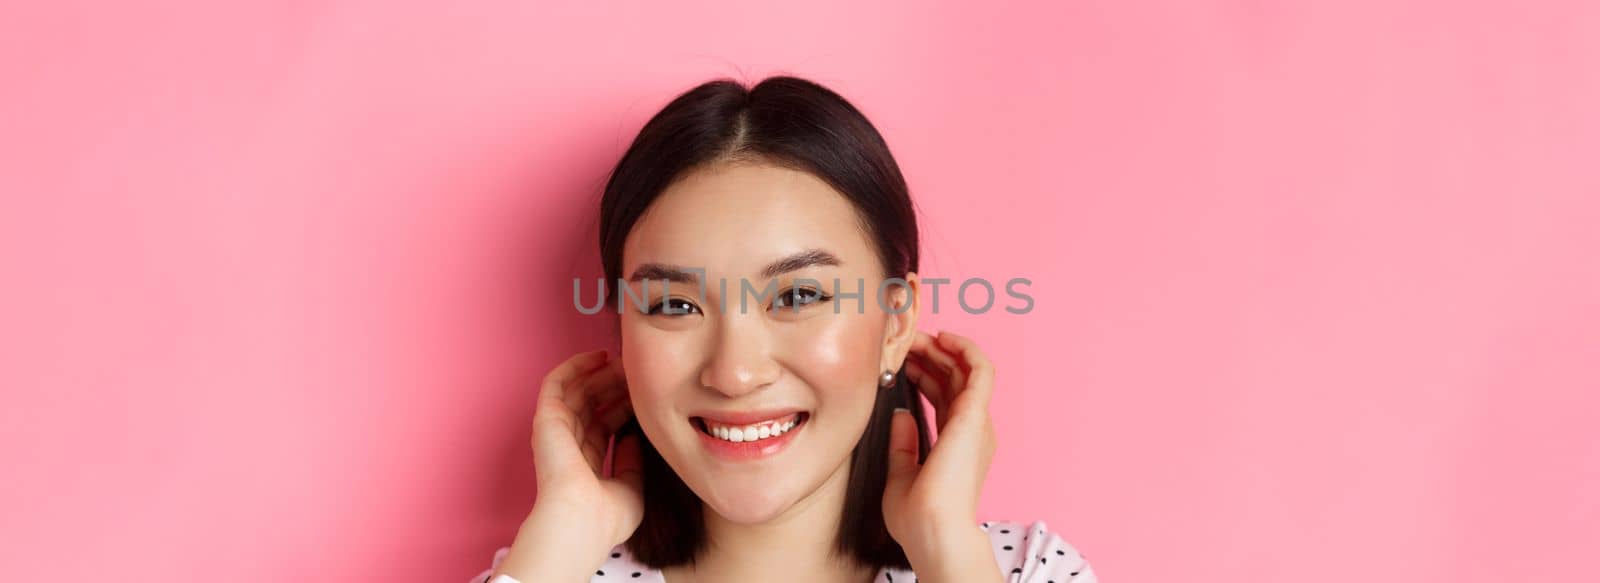 Beauty and skin care concept. Close-up of adorable smiling asian woman tuck hair behind ears, blushing and gazing at camera, standing over pink background.